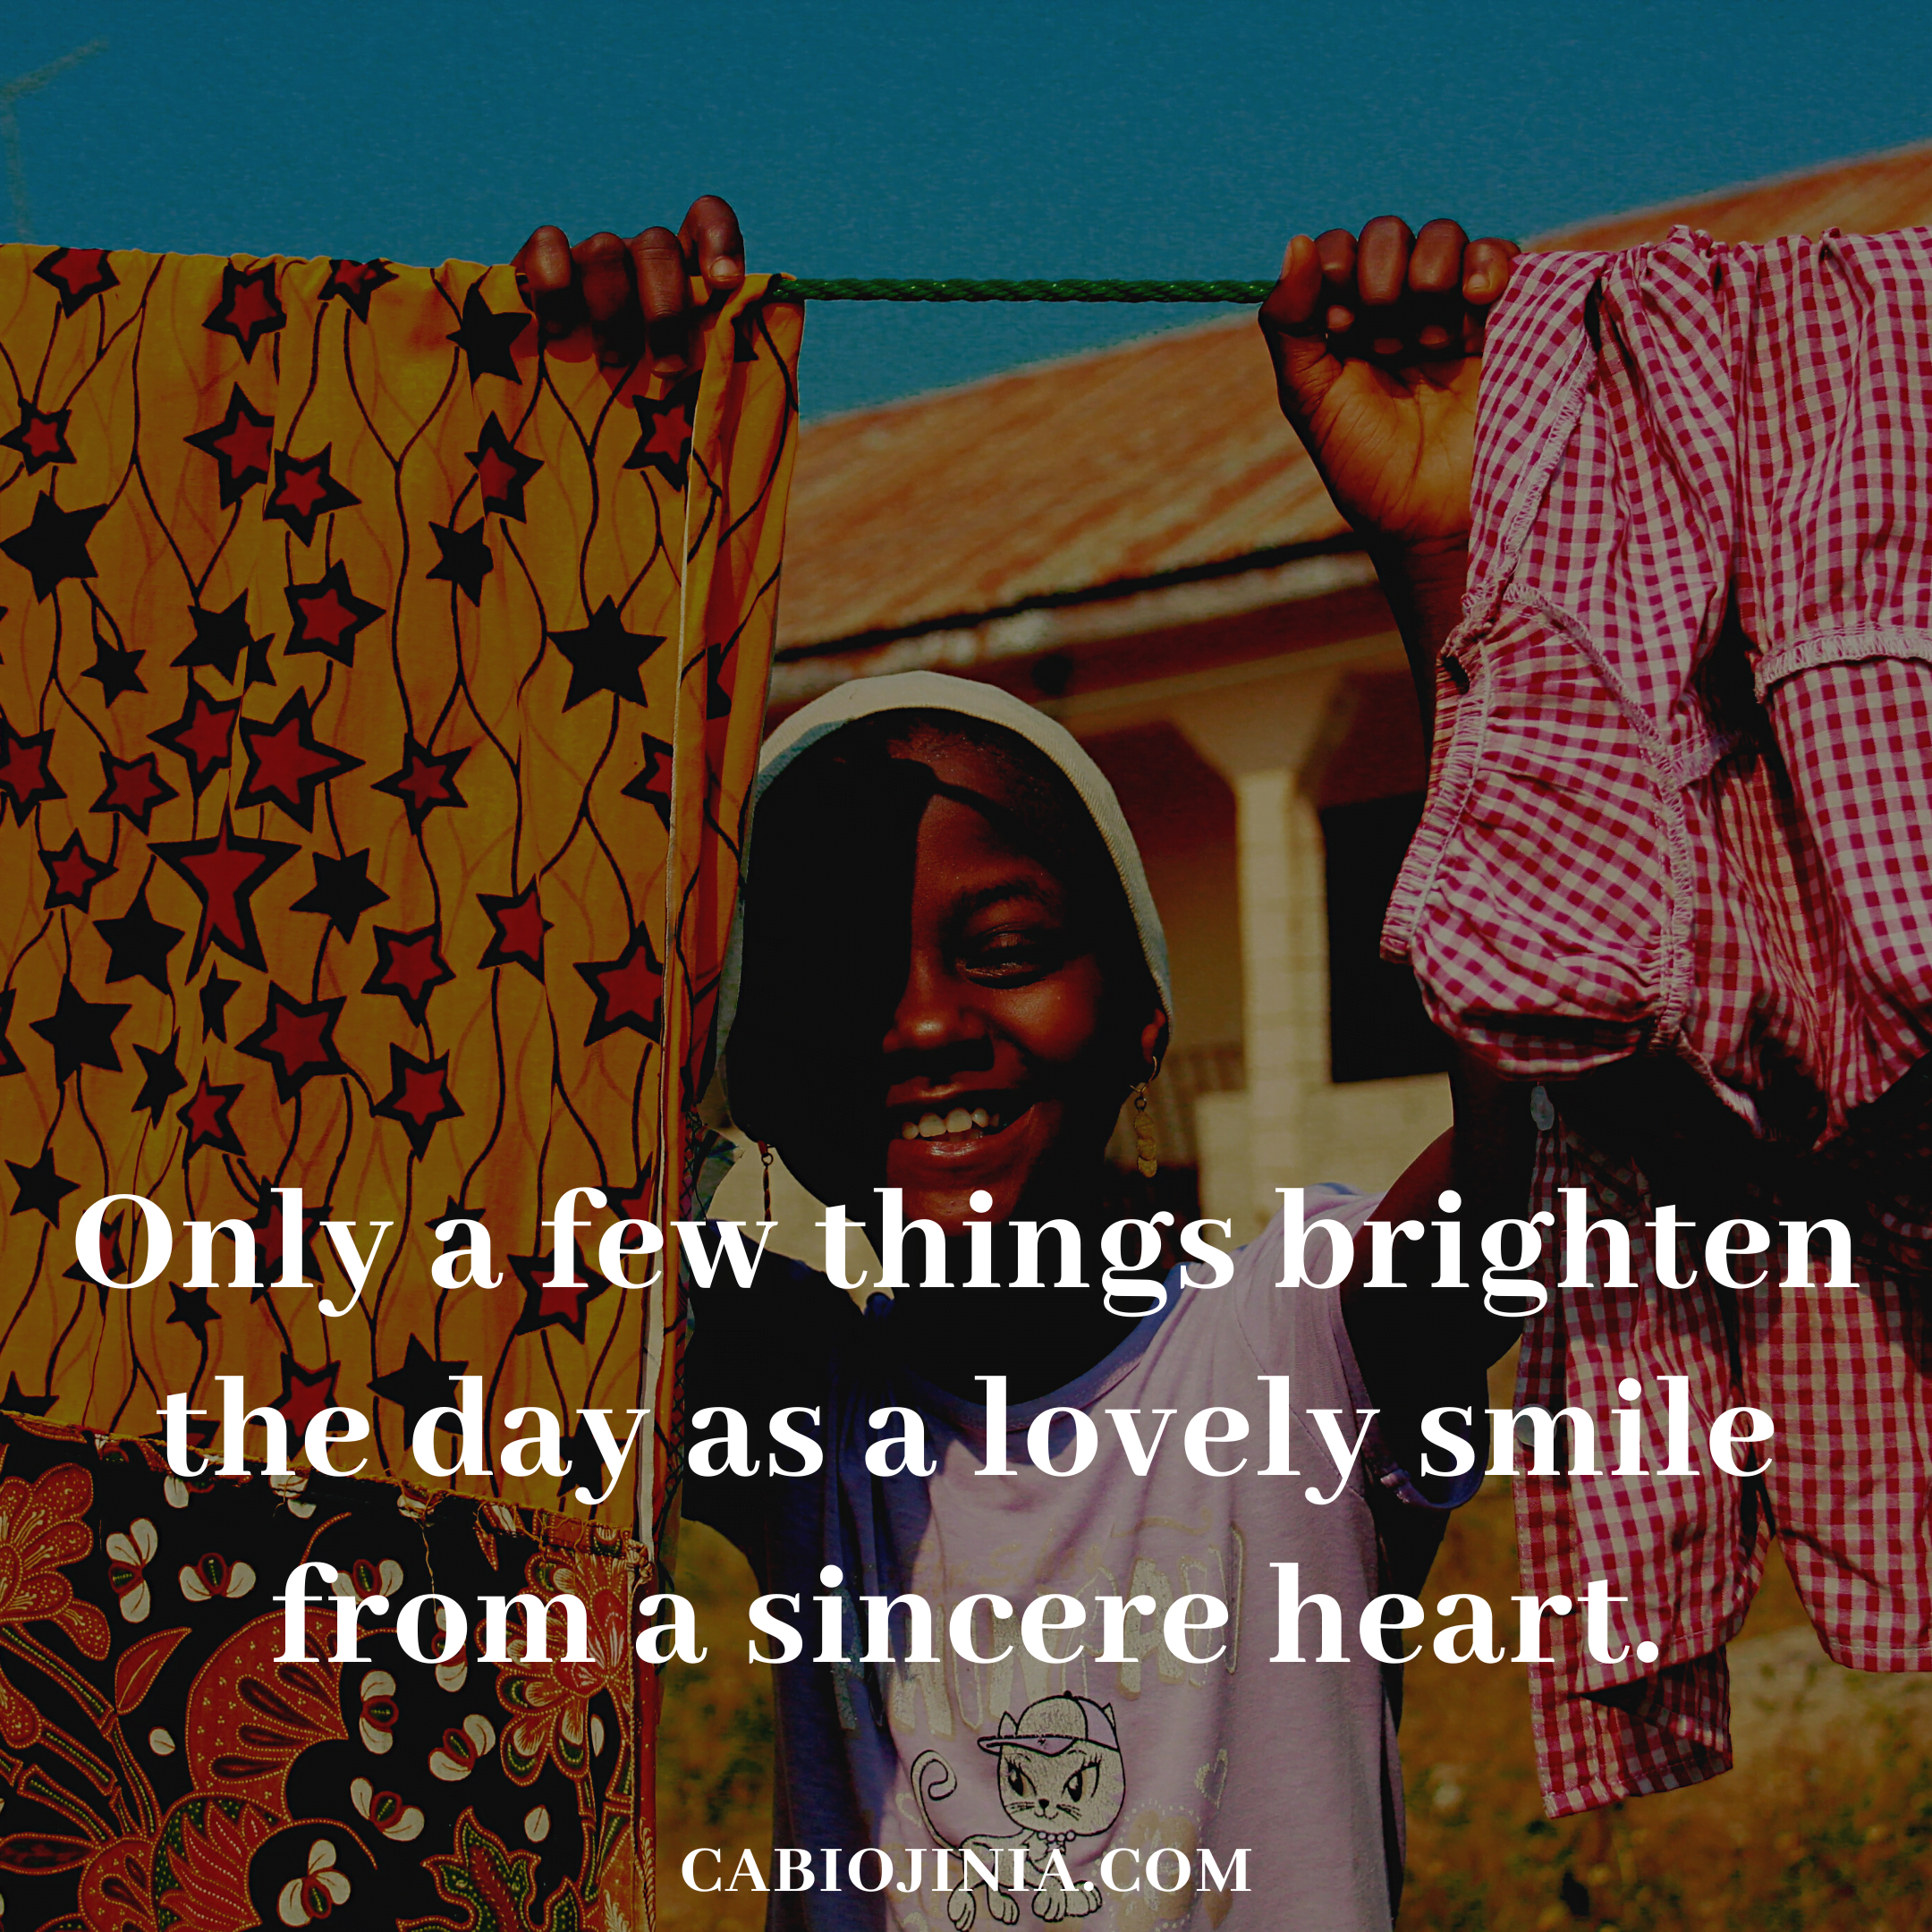 Only a few things brighten the day as lovely smile from a sincere heart. Cabiojinia